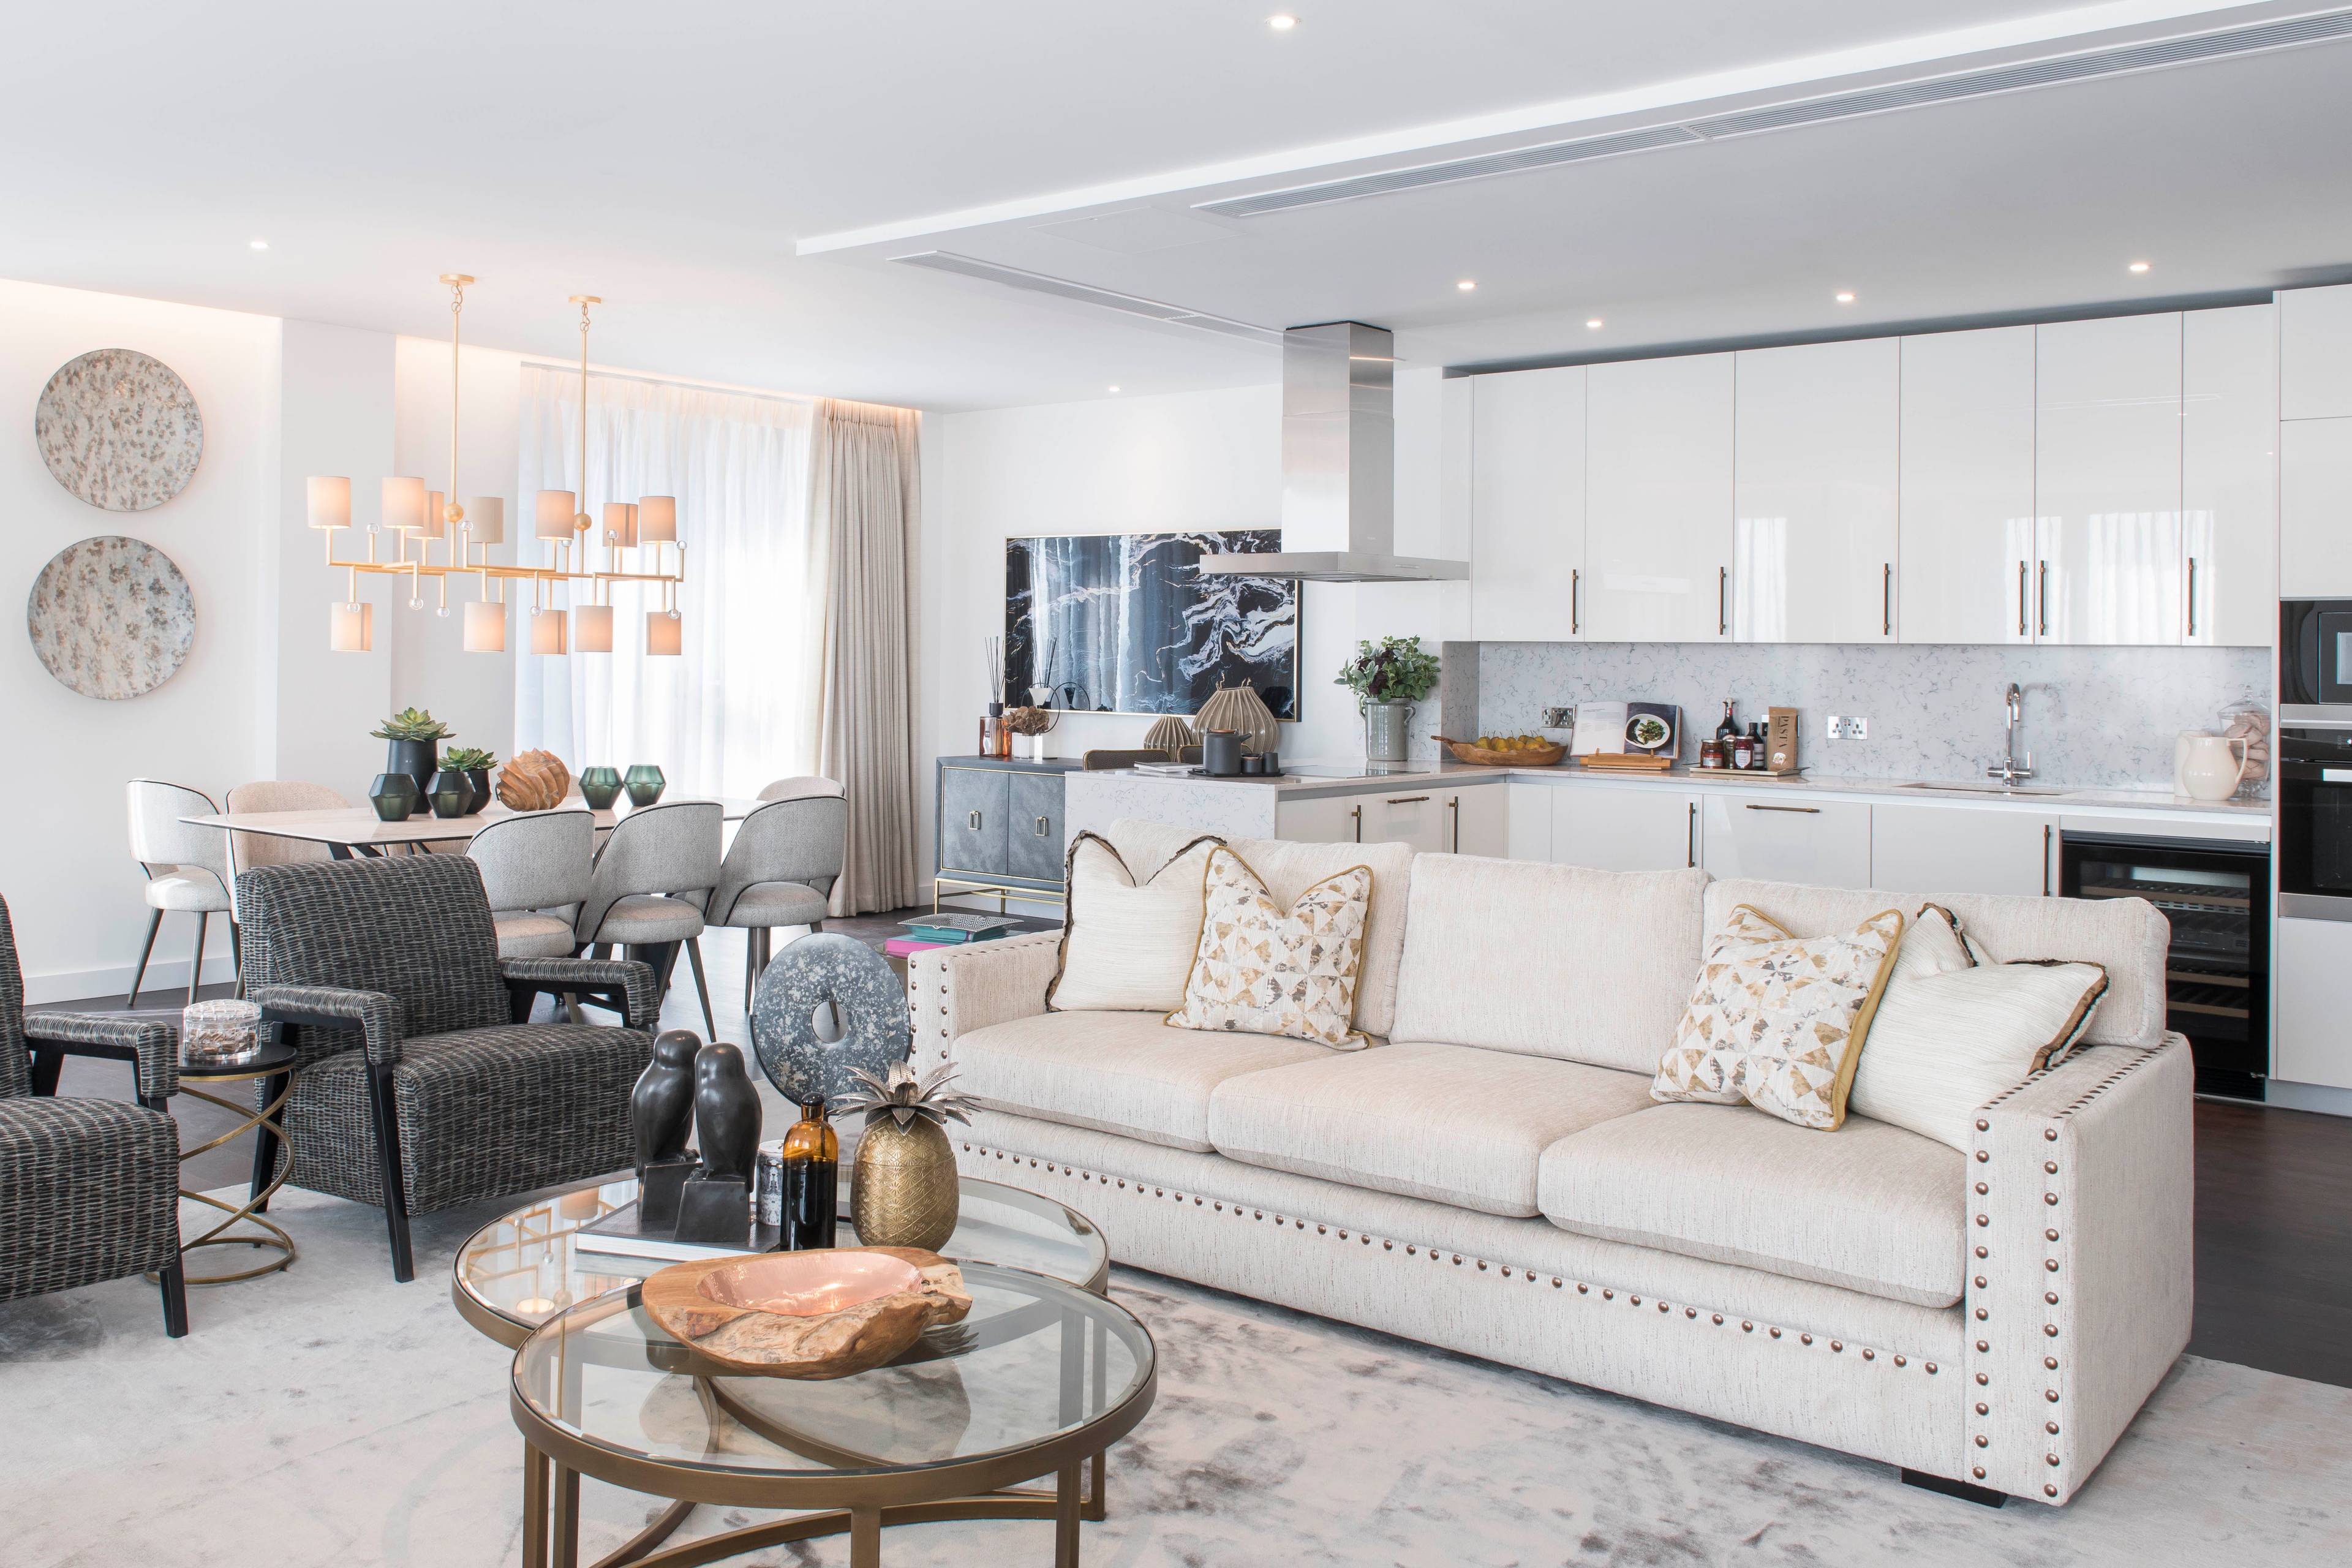 An impressive interior designed 1,715 Sq Ft three double-bedroom, two-bathroom air conditioned apartment located in Thornes House forming part of The Residence Collection in Nine Elms on London’s iconic South Bank.